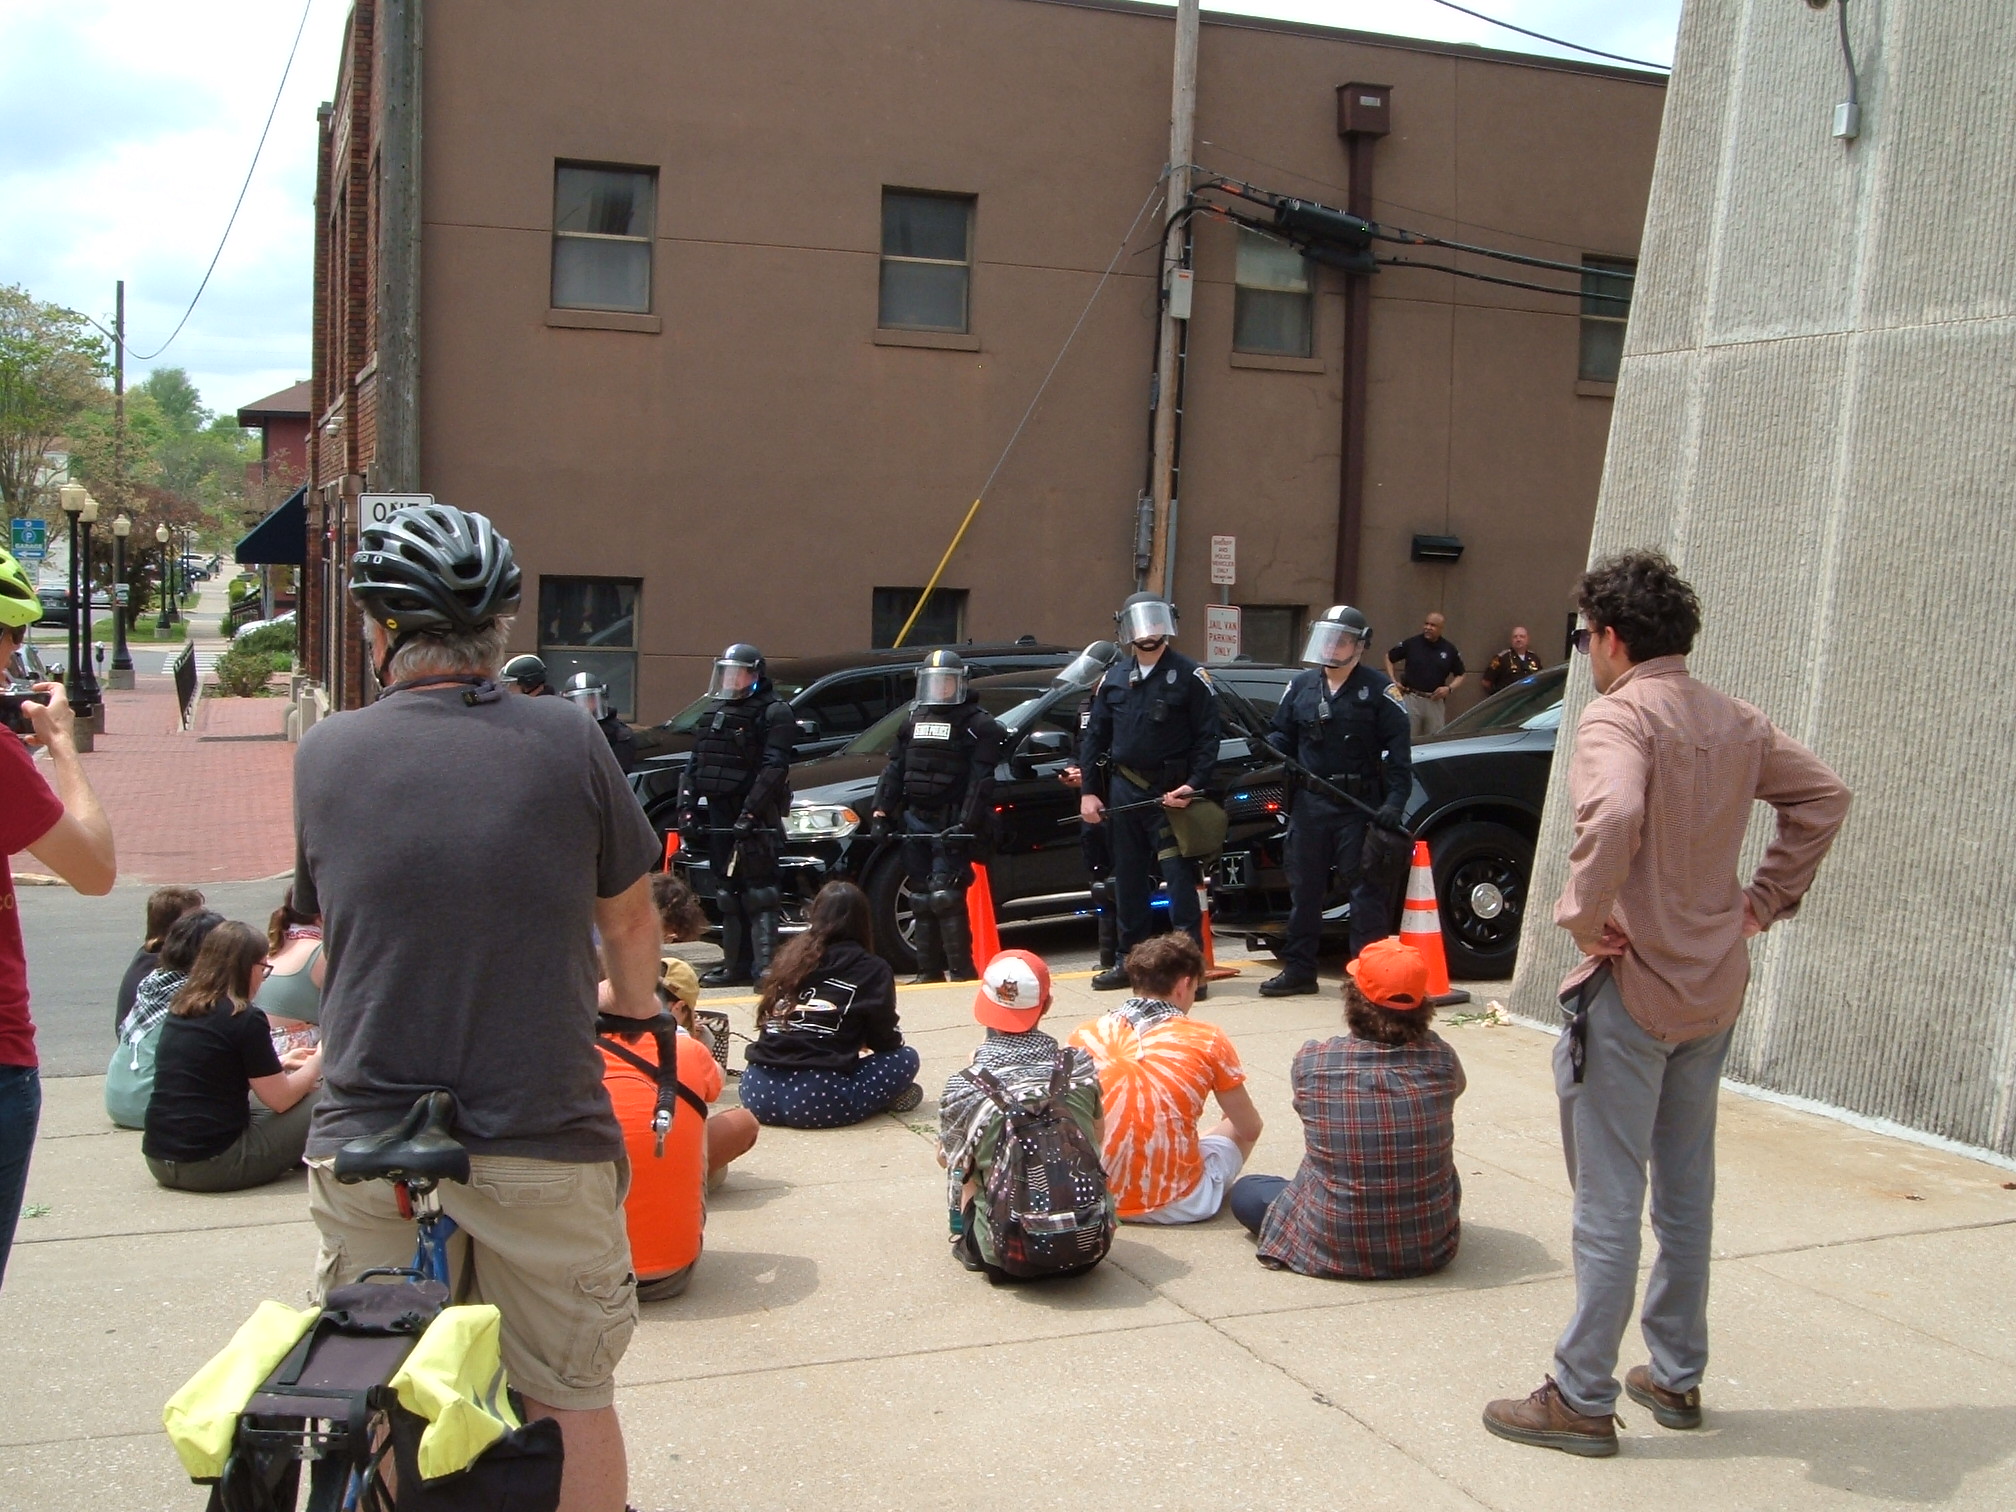 Several protestors sit on the sidewalk in front of a unit of riot police guarding the County Jail.